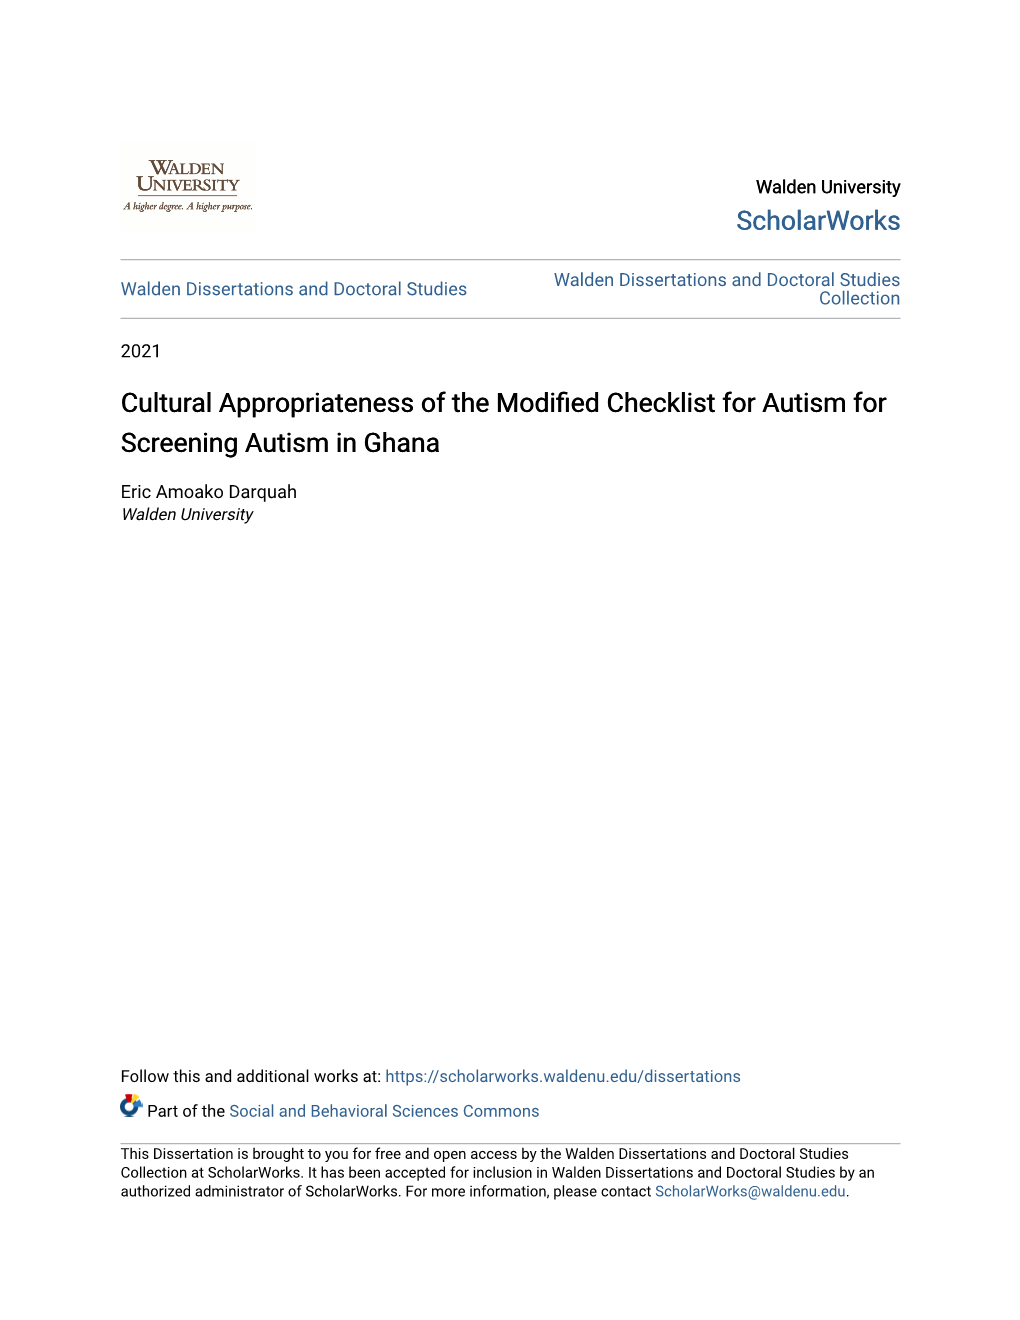 Cultural Appropriateness of the Modified Checklist for Autism for Screening Autism In